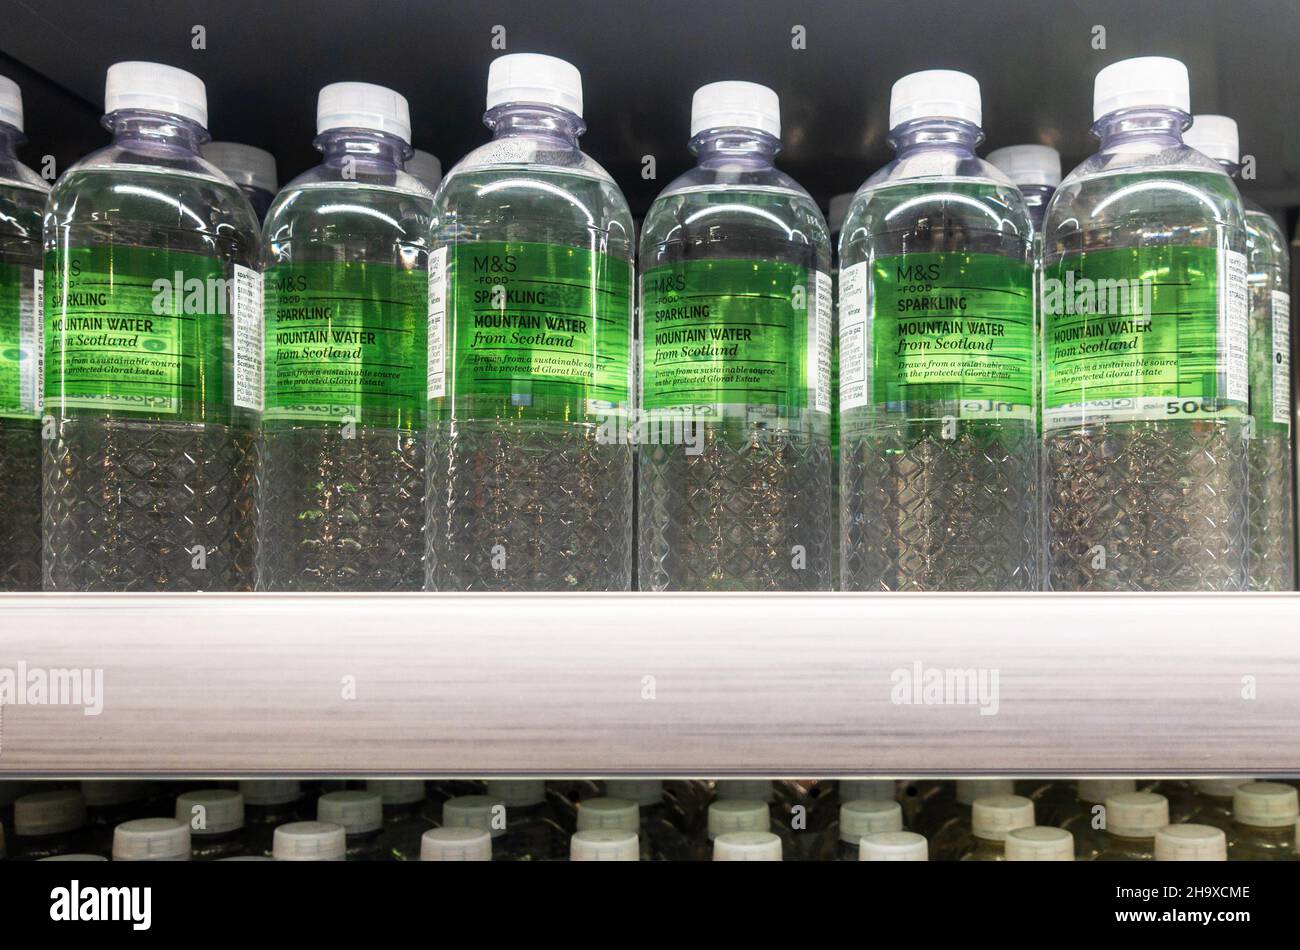 Bottles of sparkling mountain water from Scotland on a shelf at Marks & Spencer Foodhall Stock Photo